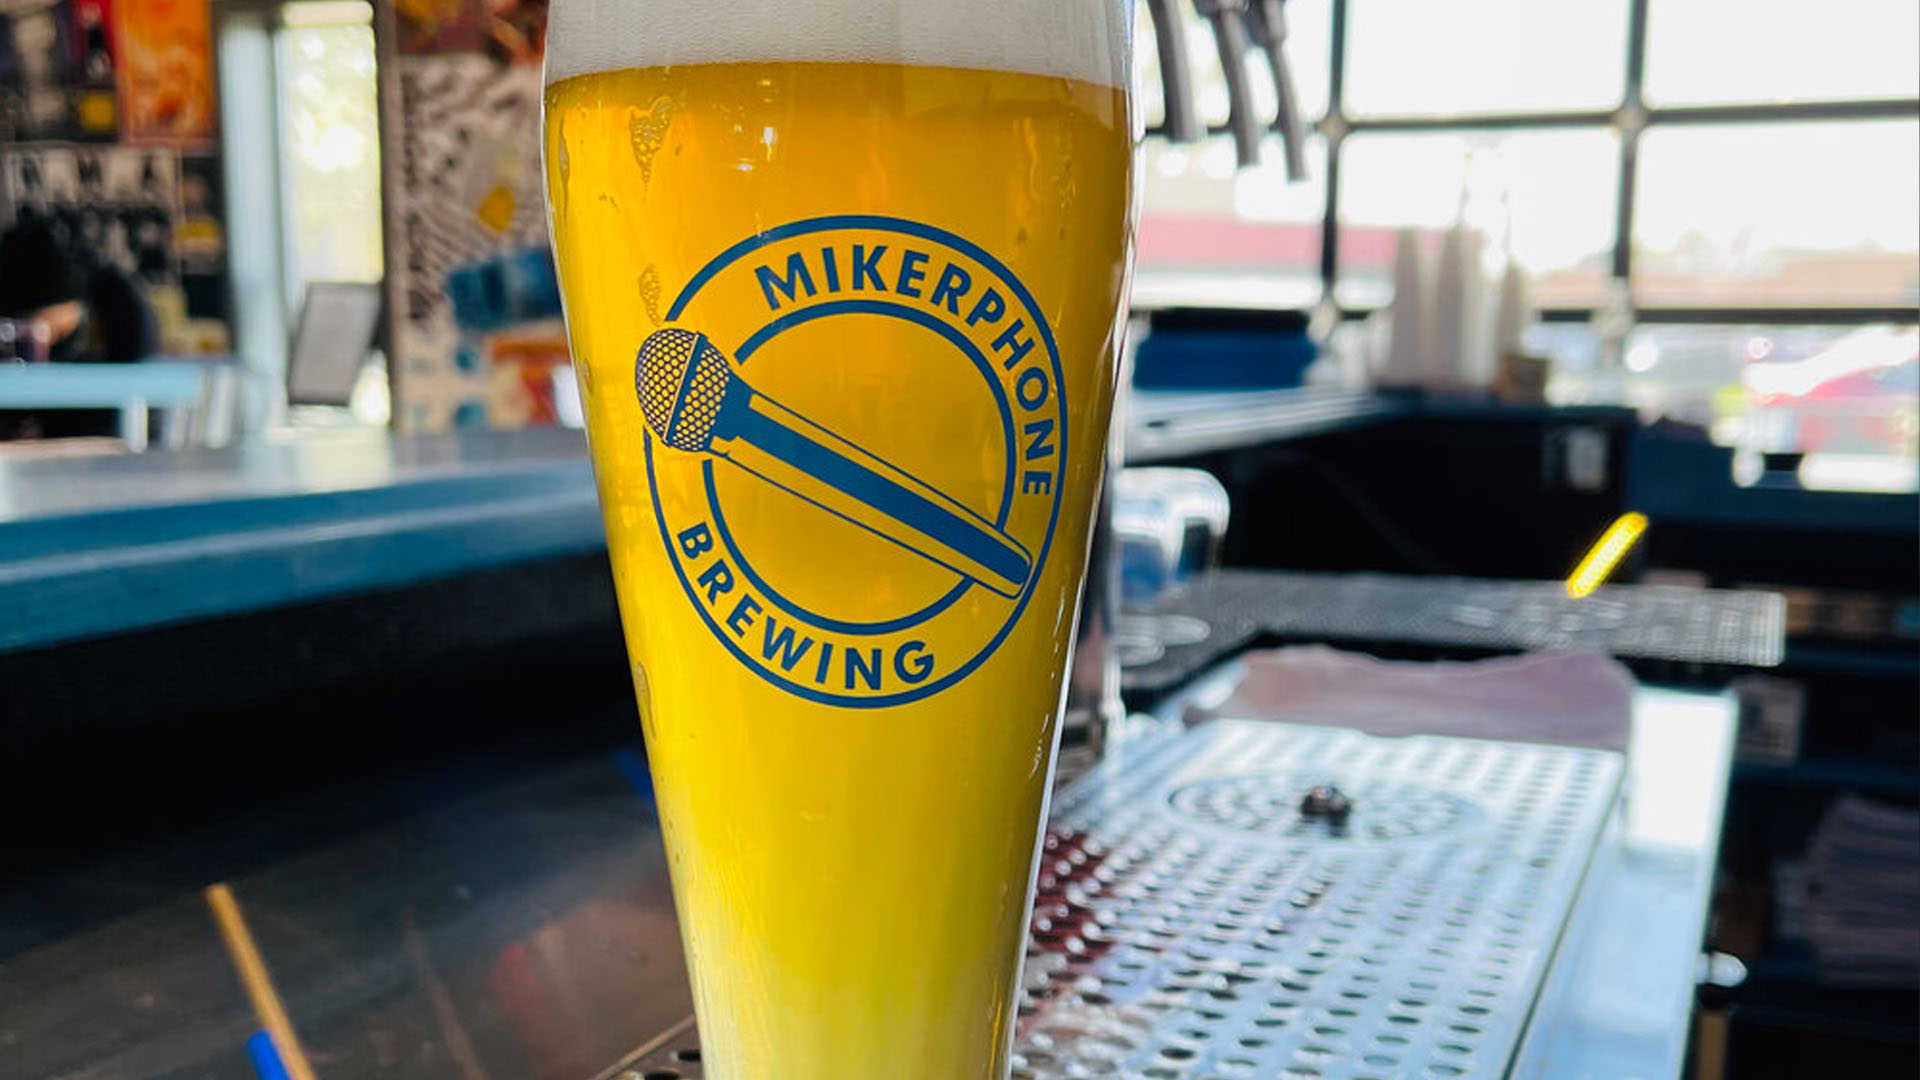 mikerphone brewing beer on a table